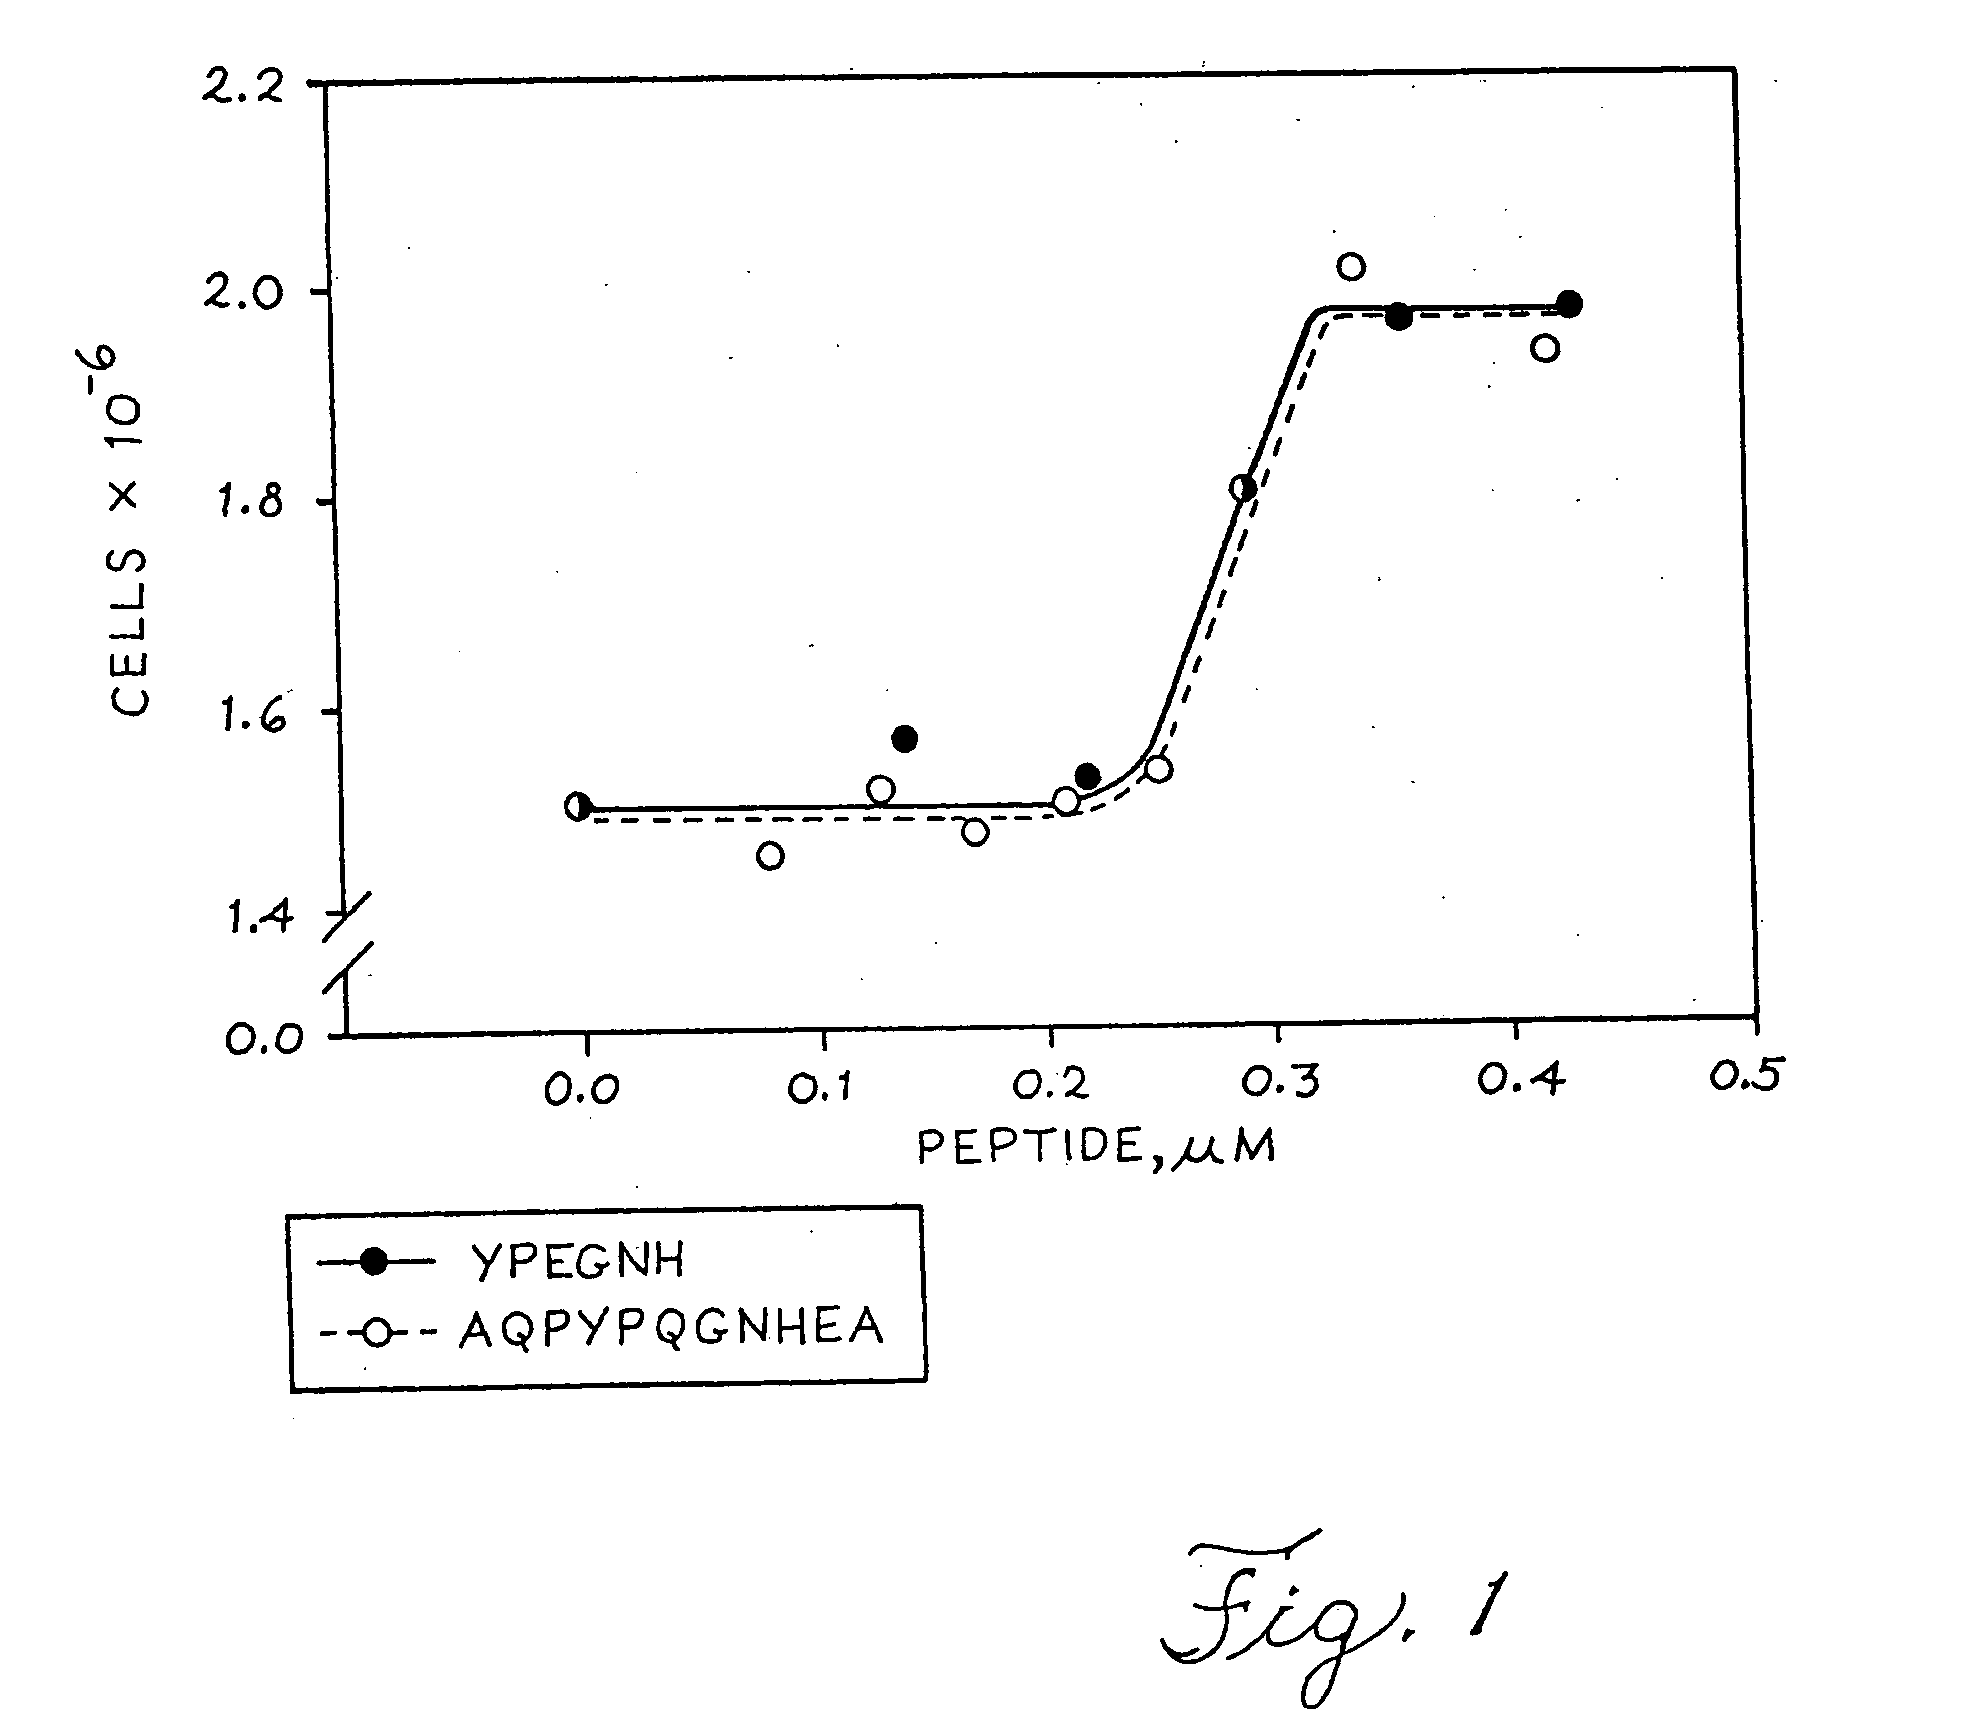 Methods for production of growth-promoting proteins and peptides for kidney epithelial cells